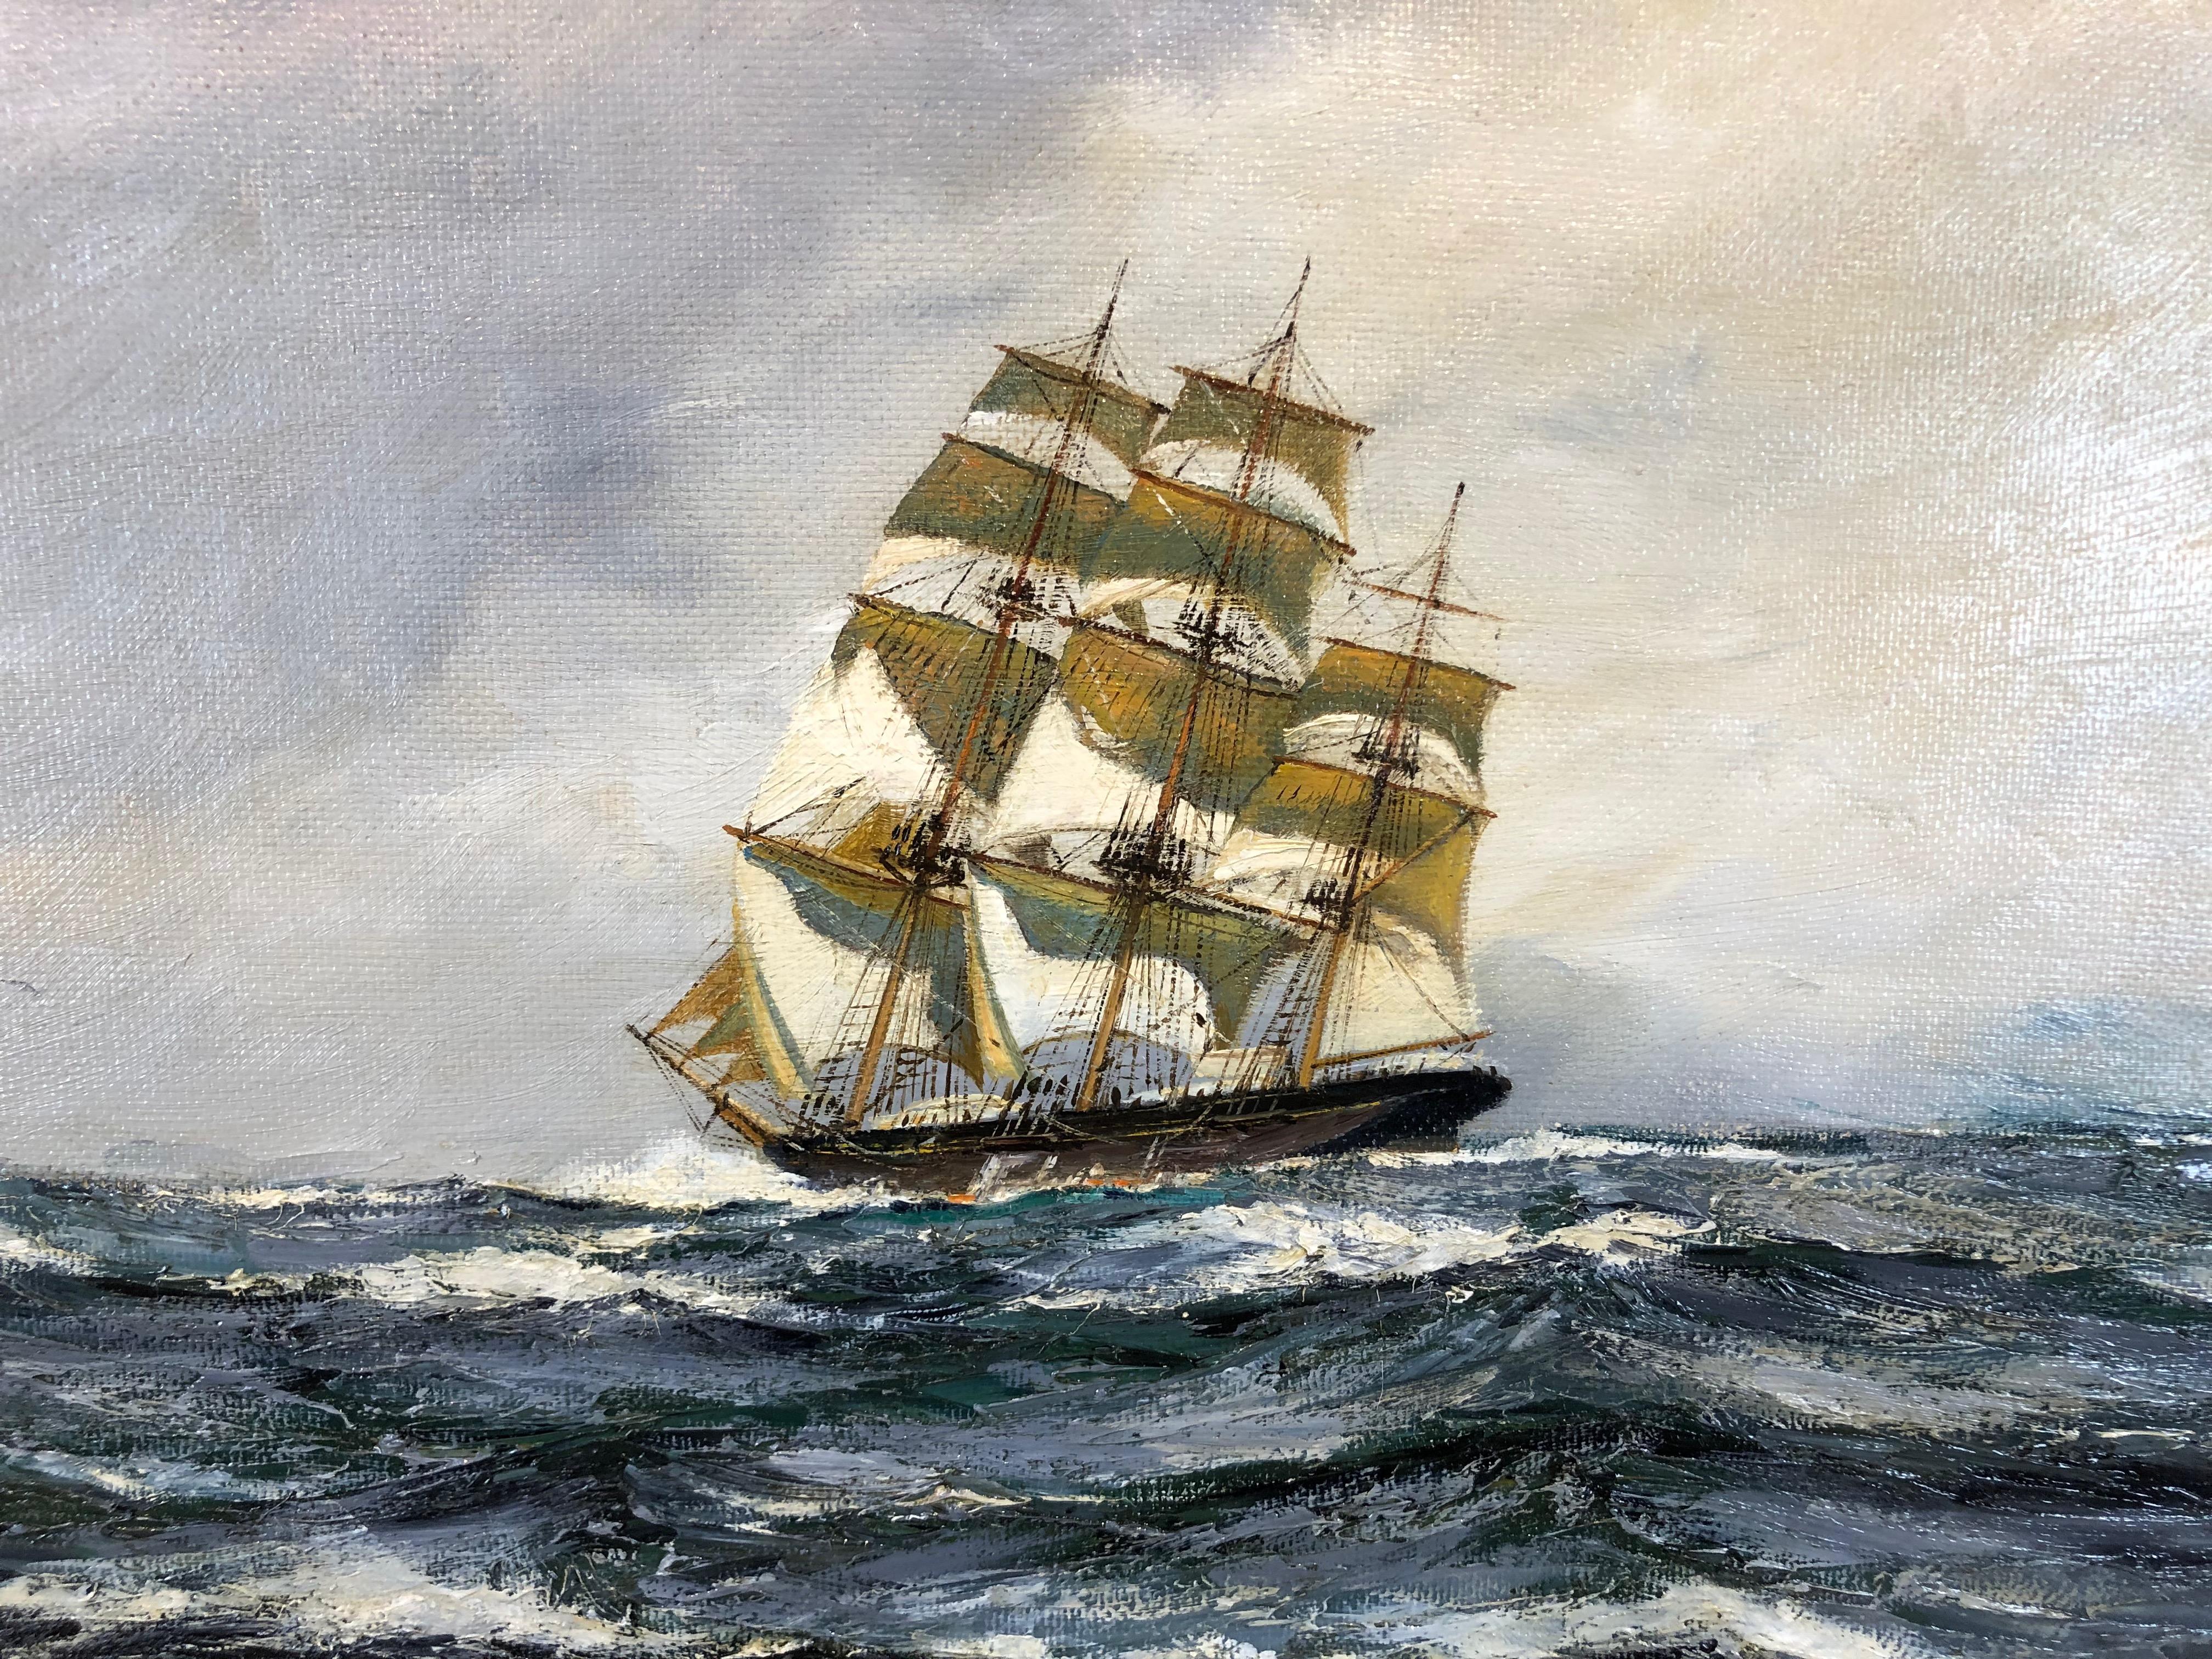 Henry Scott F.R.S.A. 1911-2005, was a painter of atmospheric maritime scenes similar to Montague Dawson. He was awarded an Honorary Life Membership to the Association Of International Master Mariners. Scott was well known for his depictions of both